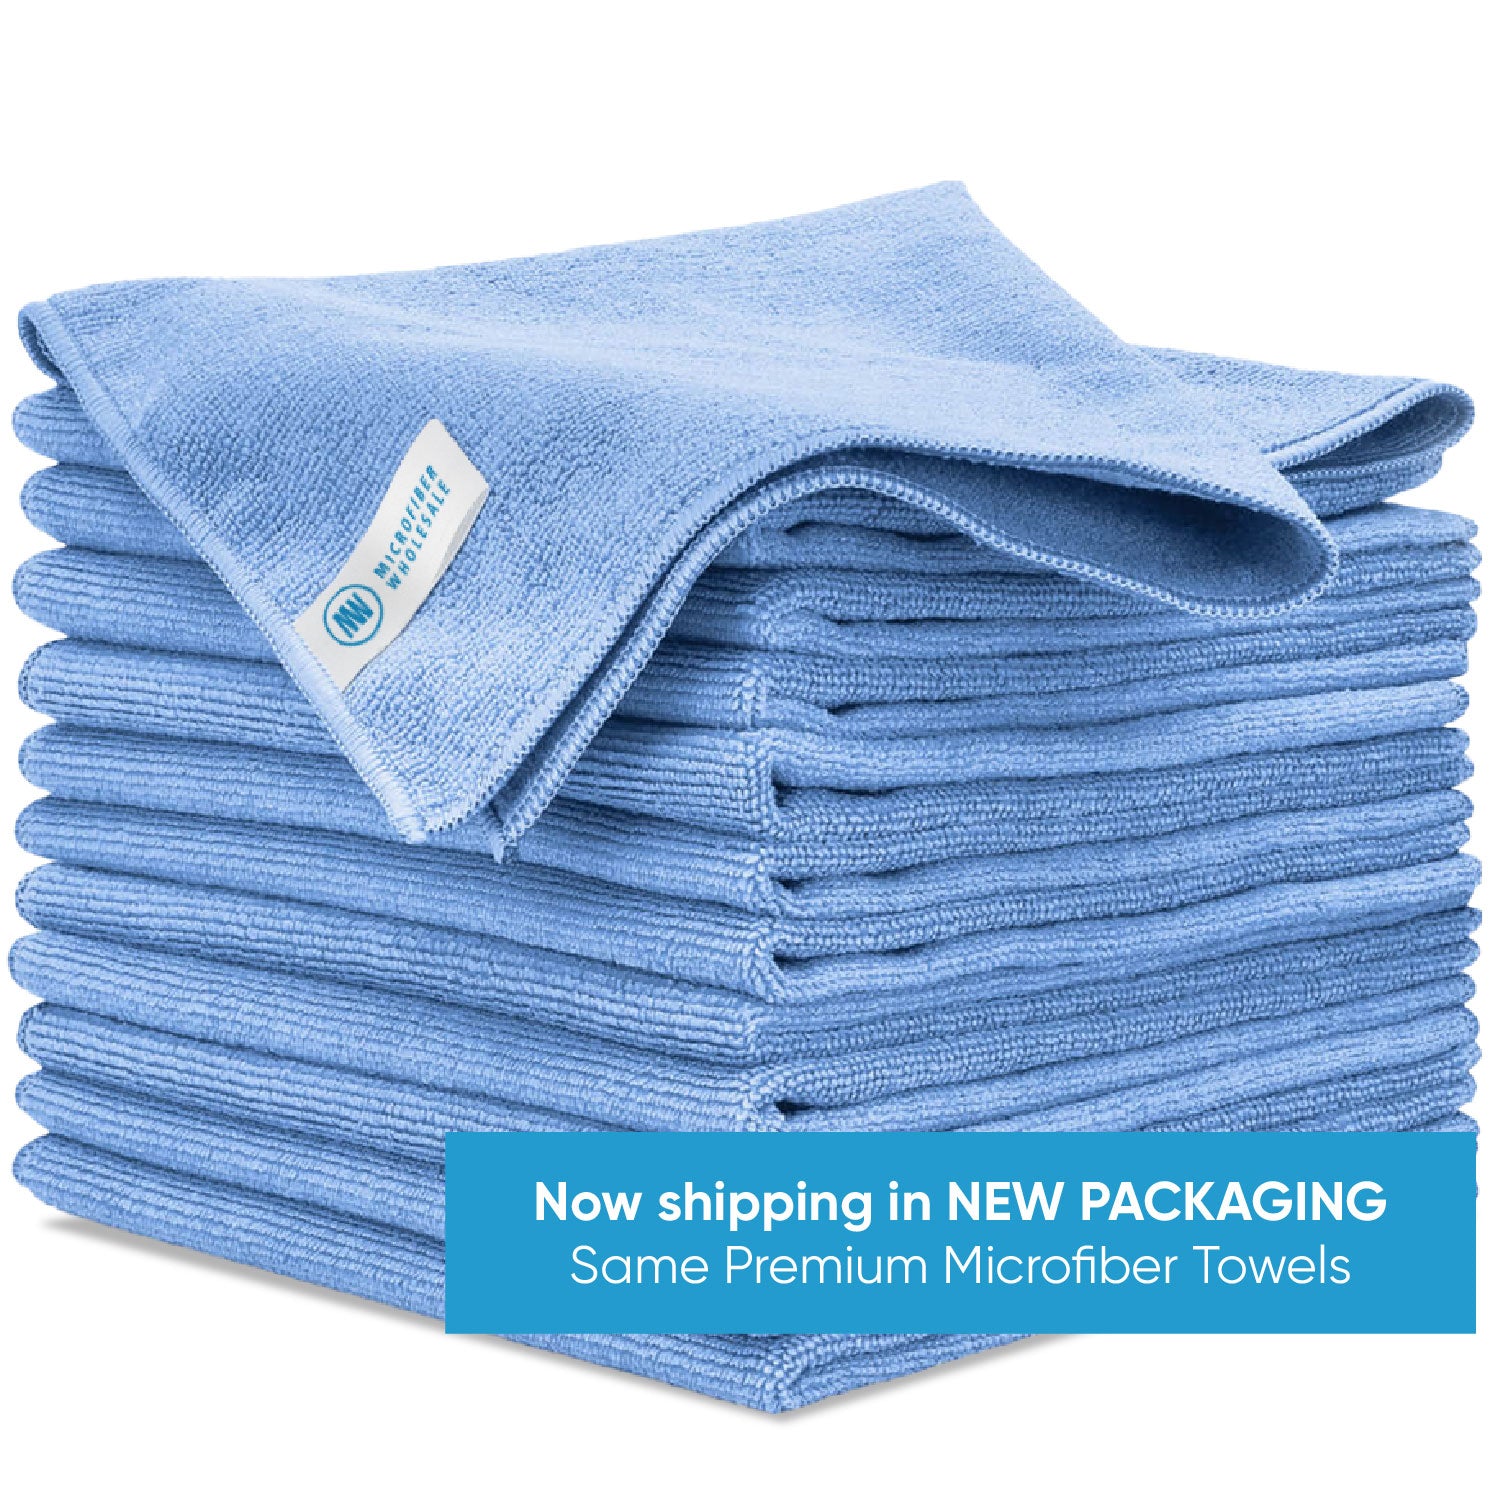 Bulk White Cleaning Rags - One Side Terry, One Side Smooth, Package Options